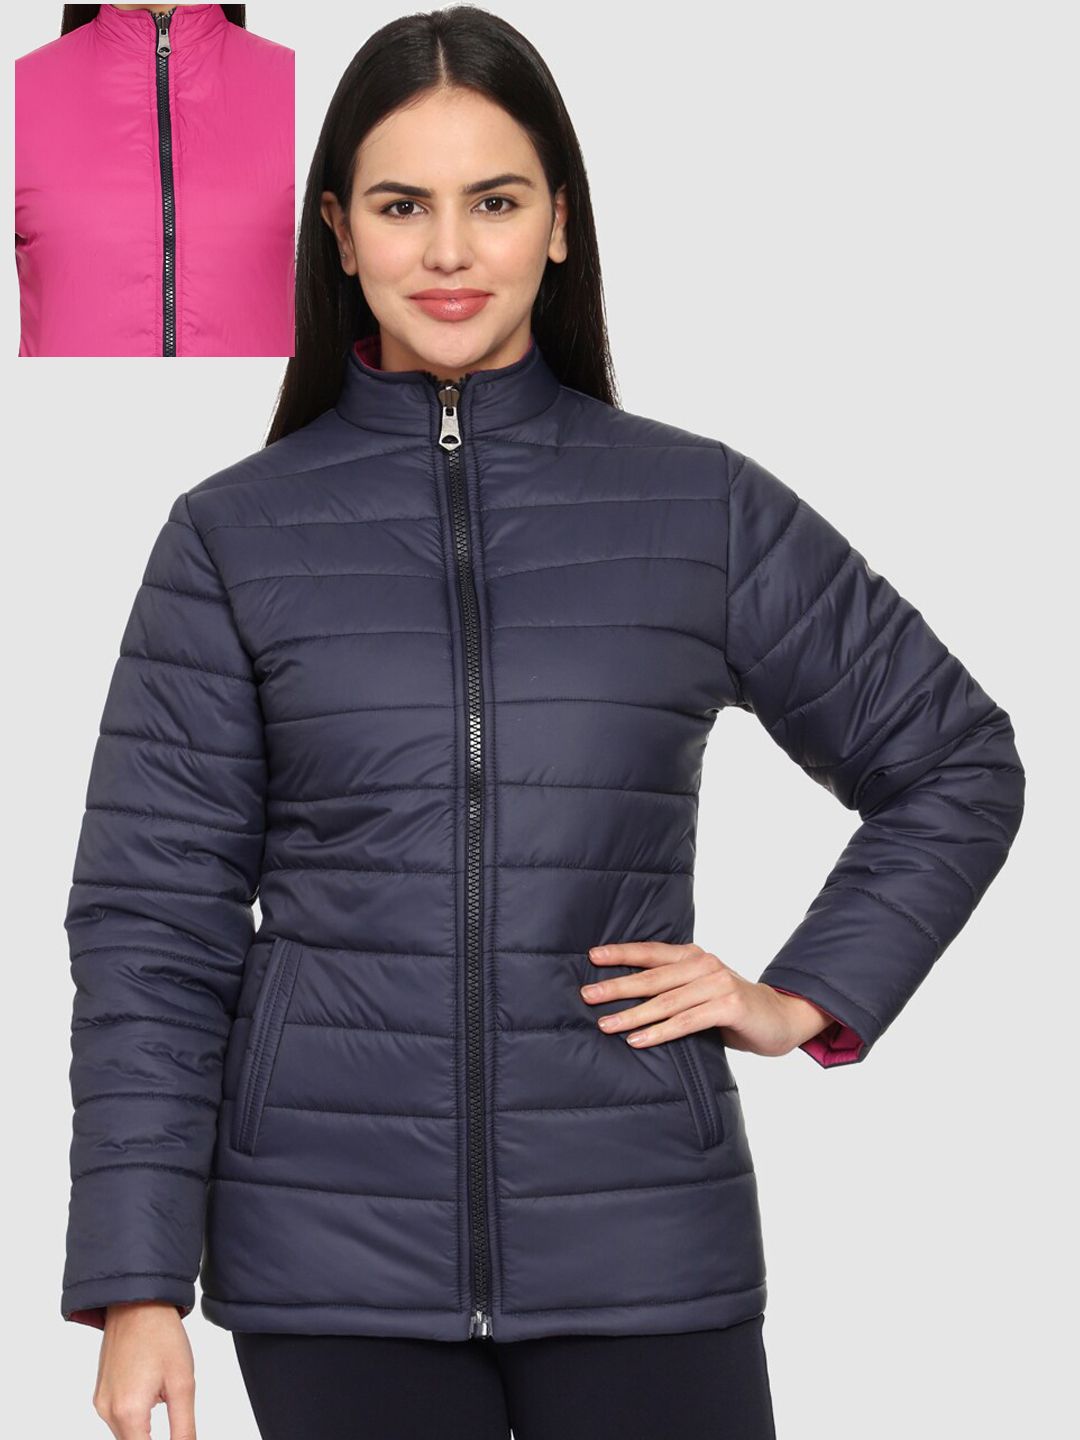 CL SPORT Women Navy Blue & Pink Reversible Puffer Jacket Price in India